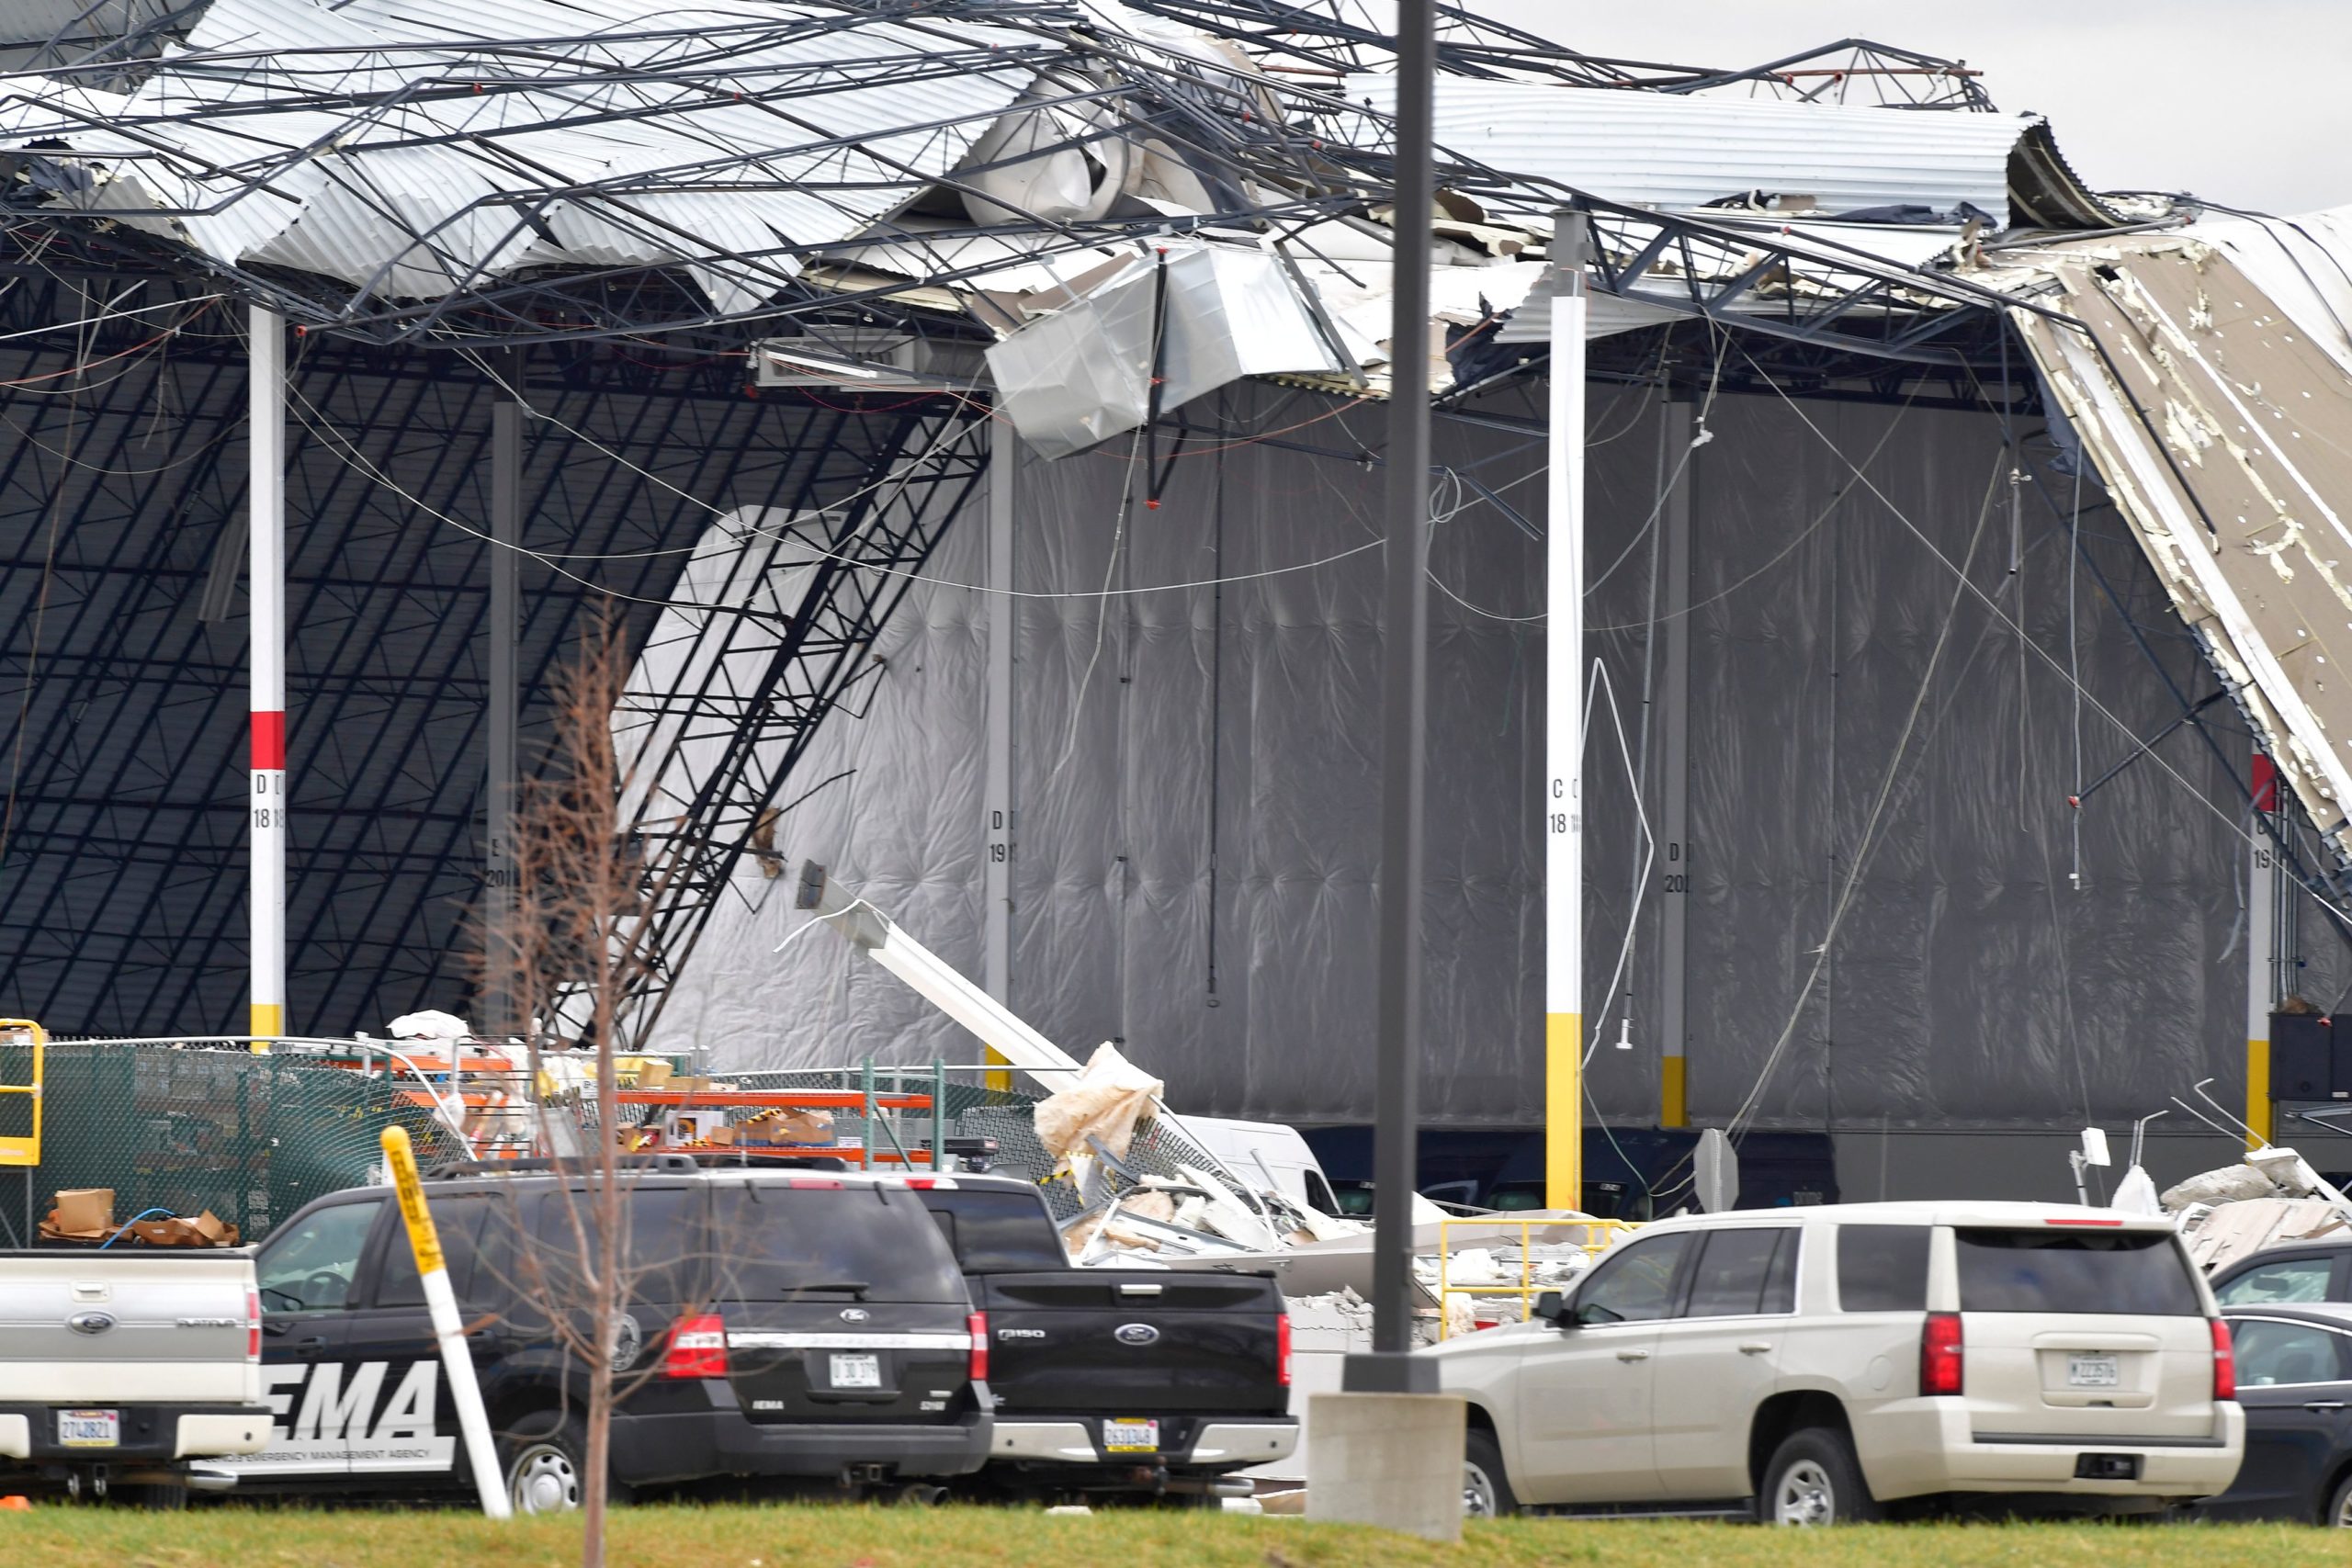 Workers remove debris from an Amazon Fulfillment Center in Edwardsville, Illinois, on December 11, 2021, after it was hit by a tornado. - Tornadoes ripped through five US states overnight, leaving more than 70 people dead Saturday in Kentucky and causing multiple fatalities at an Amazon warehouse in Illinois that suffered "catastrophic damage" with around 100 people trapped inside. The western Kentucky town of Mayfield was "ground zero" of the storm -- a scene of "massive devastation," one official said. (Photo by Tim Vizer / AFP) (Photo by TIM VIZER/AFP via Getty Images)